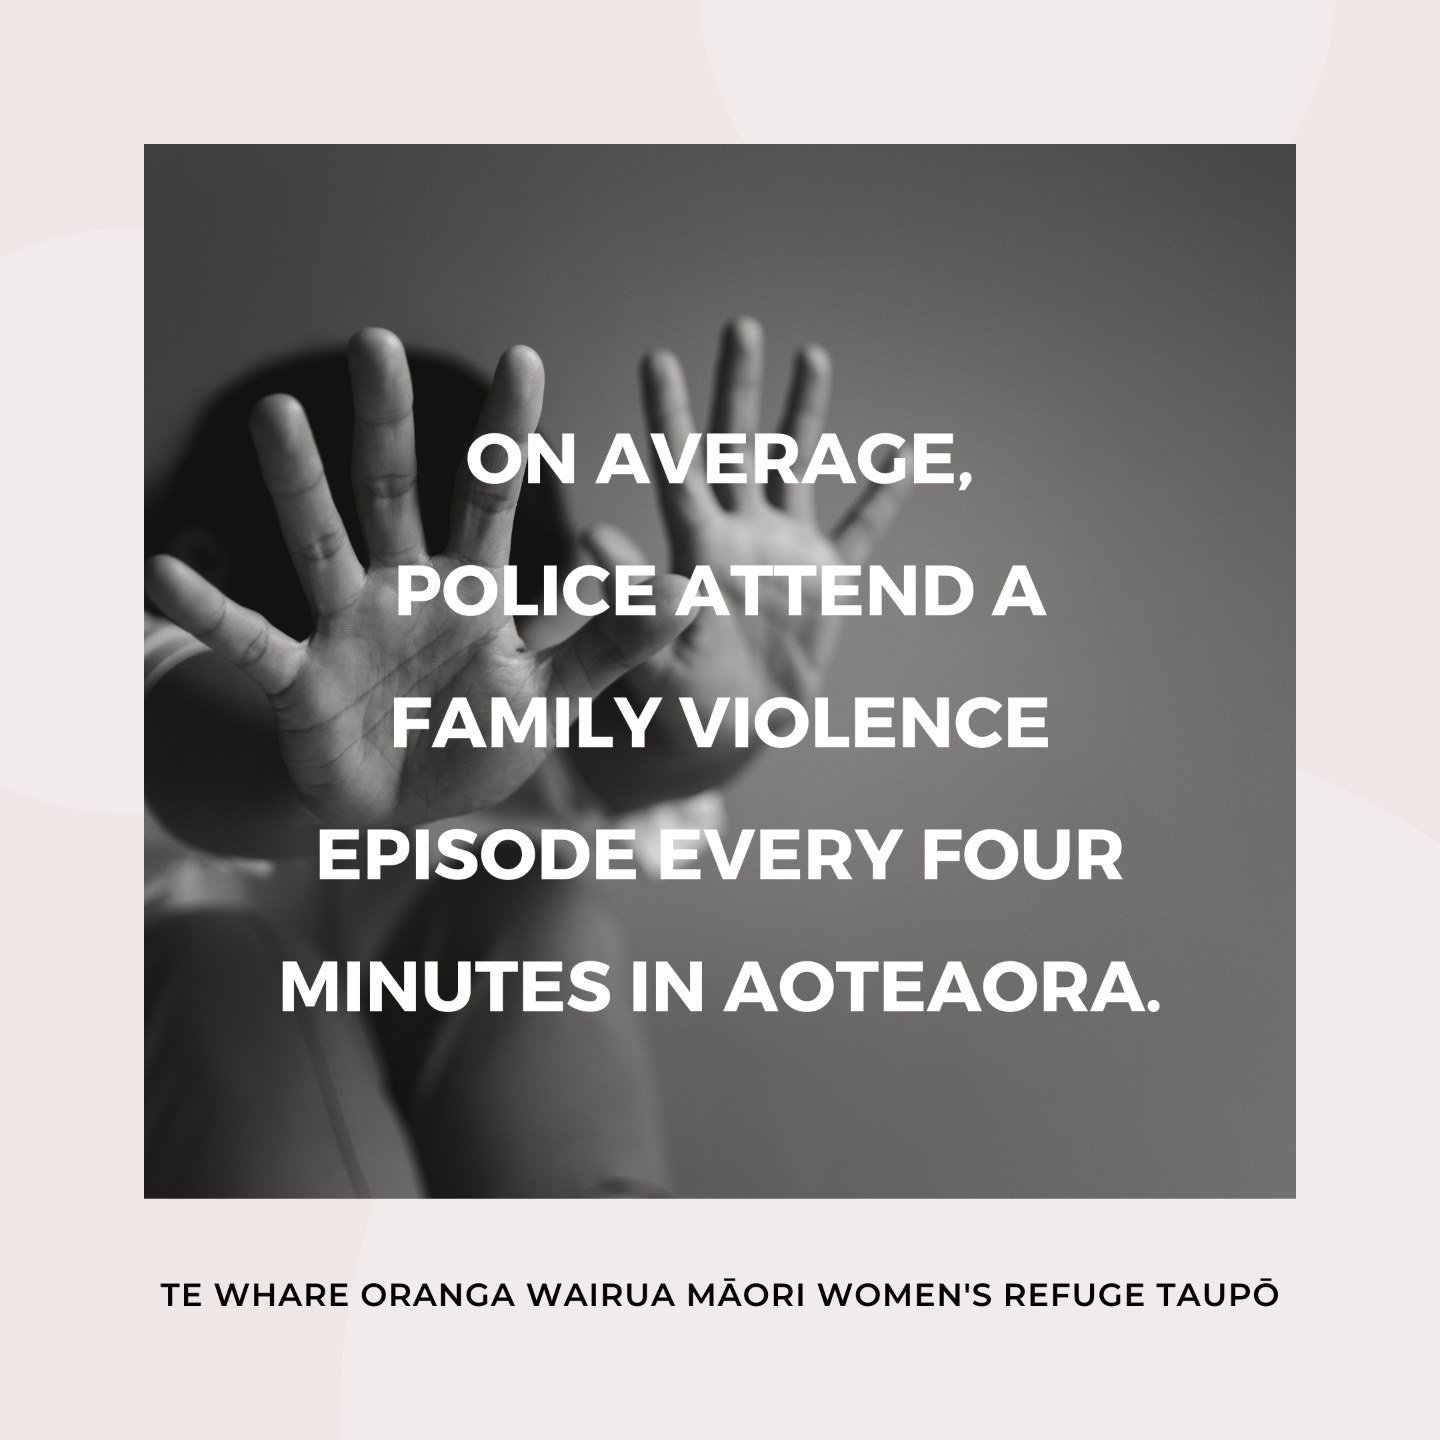 On average, police attend a family violence episode every four minutes in Aotearoa. Time to make a change.

www.twowrefuge.org.nz